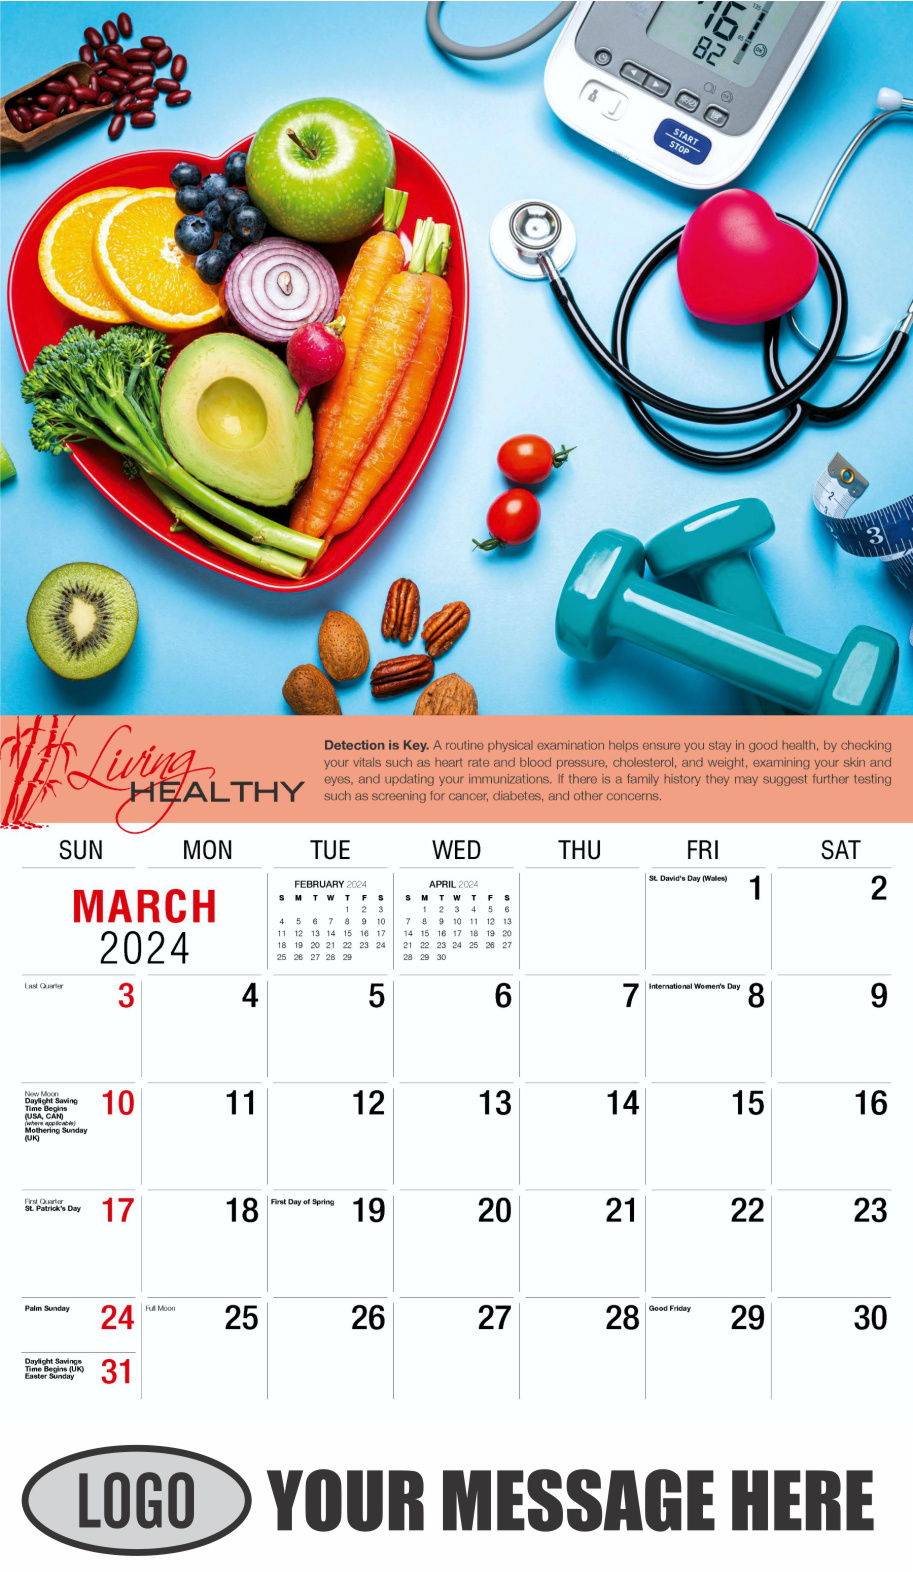 Living Healthy 2024 Business Promotional Calendar - March